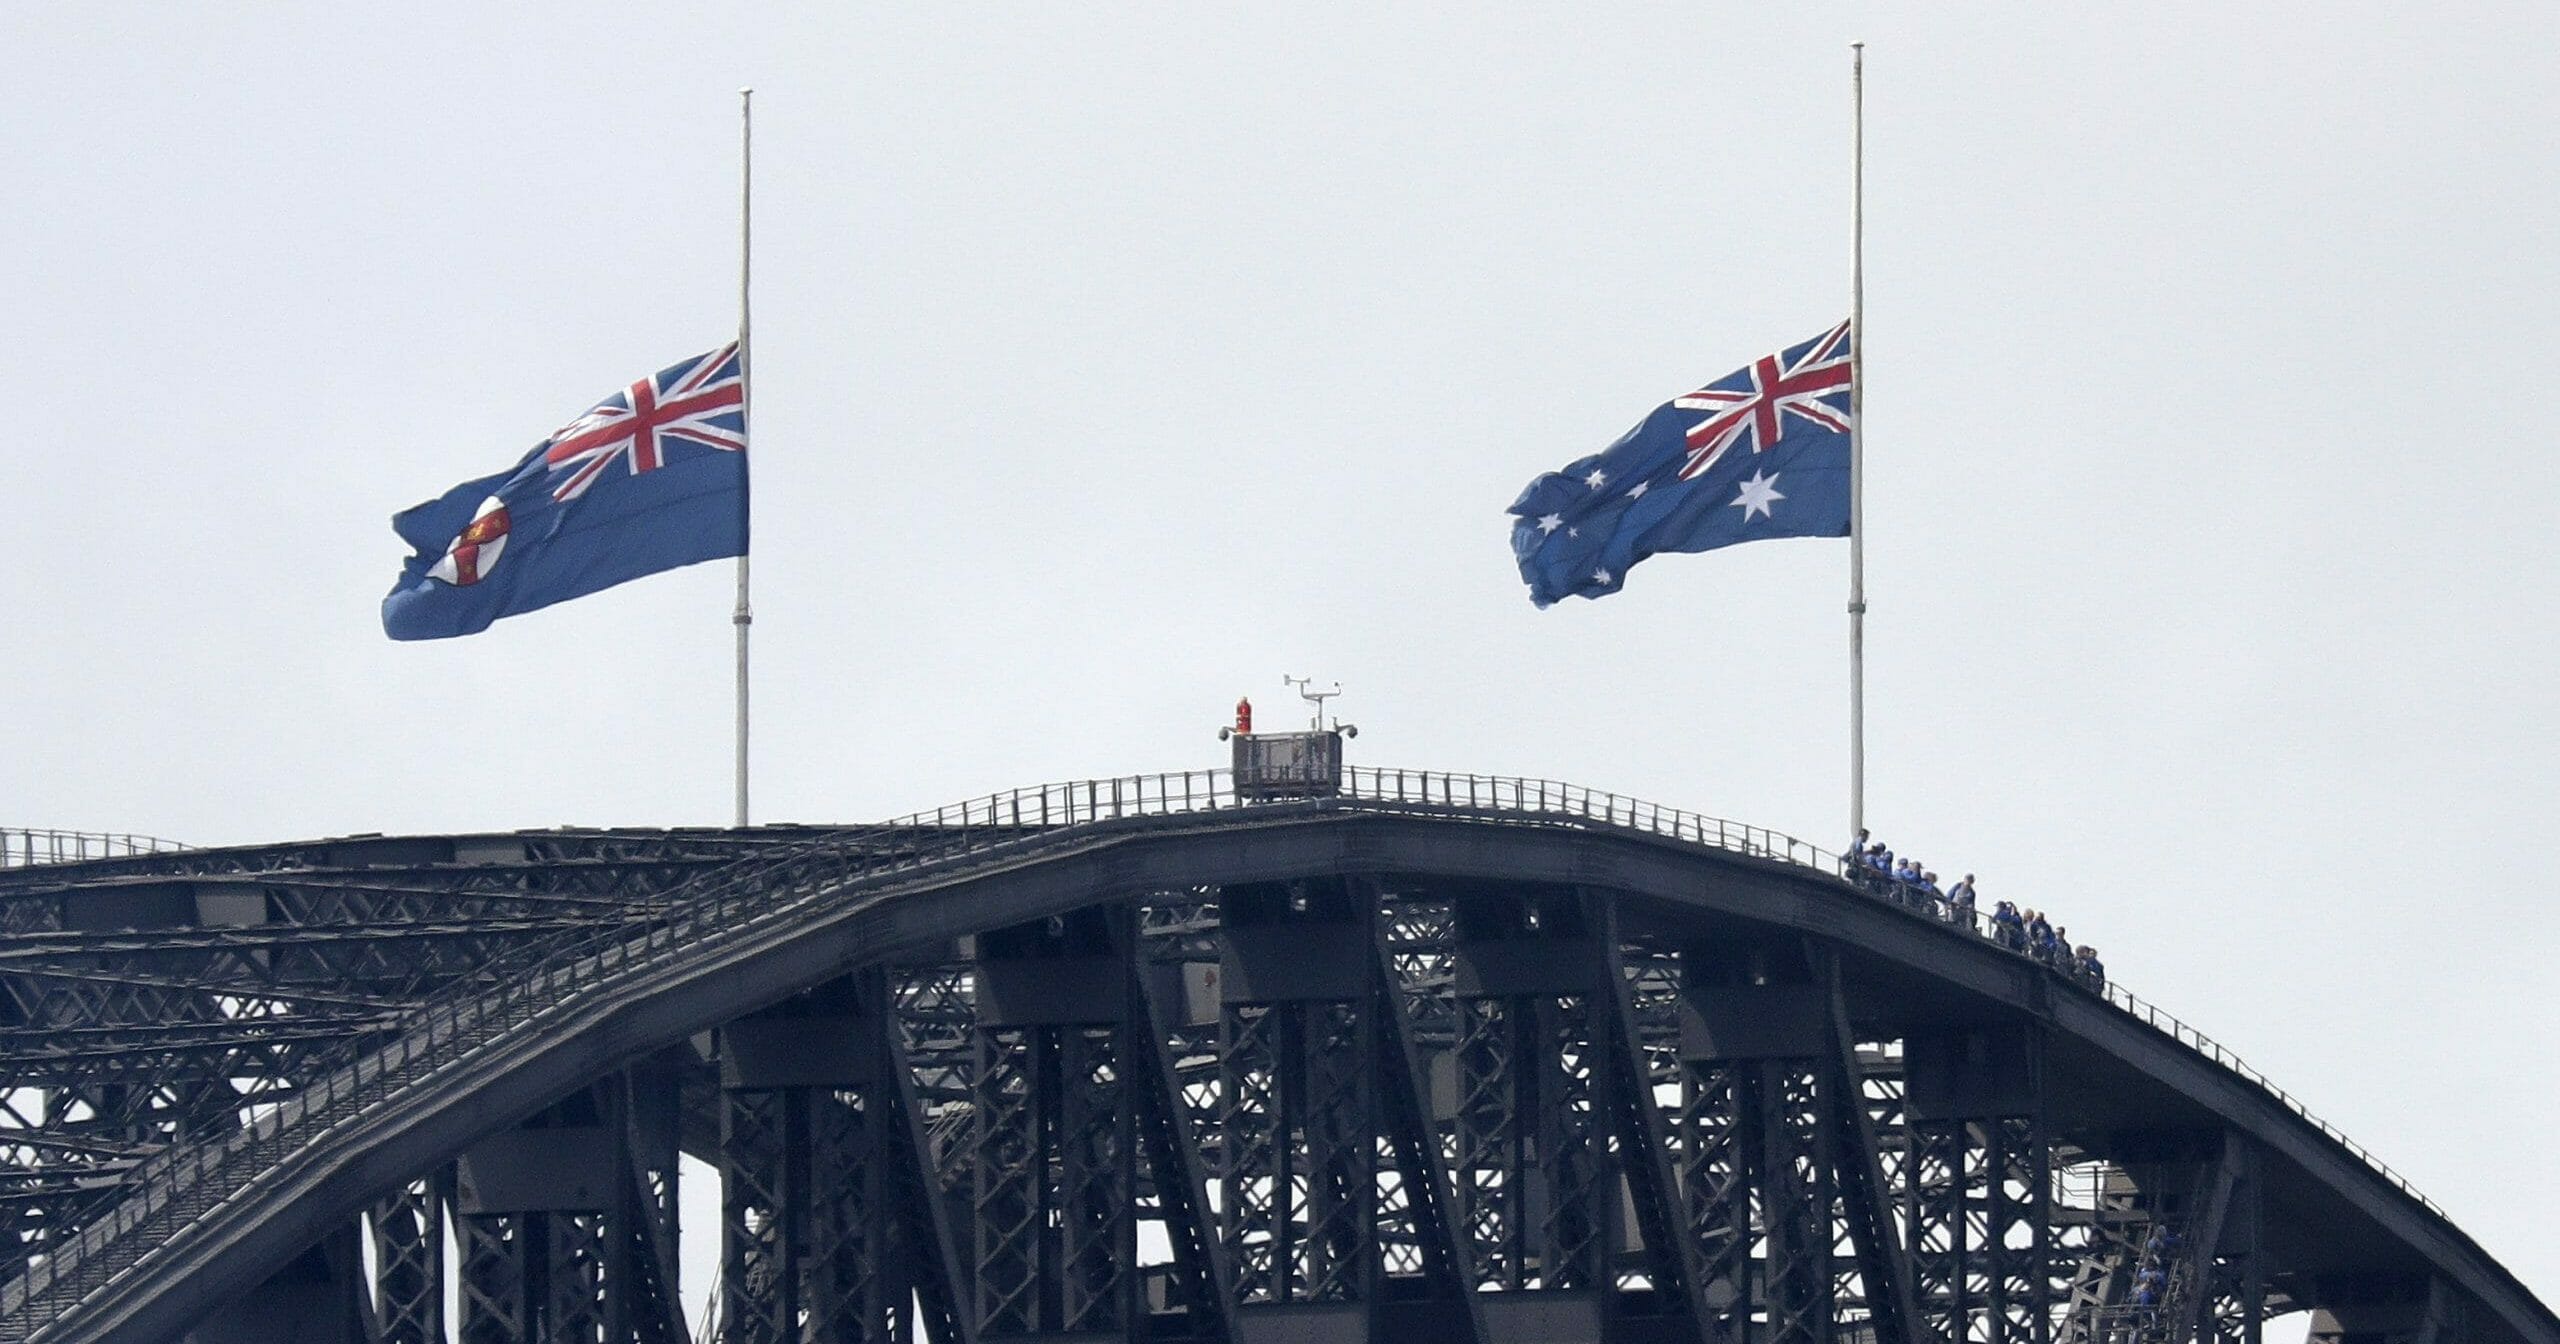 People climbing the Sydney Harbour Bridge stop under flags flying at half-mast as mark of mourning and respect in Sydney, Australia, on Jan. 24, 2020, for three U.S. crew members of an aerial water tanker that crashed while battling wildfires in Australia.